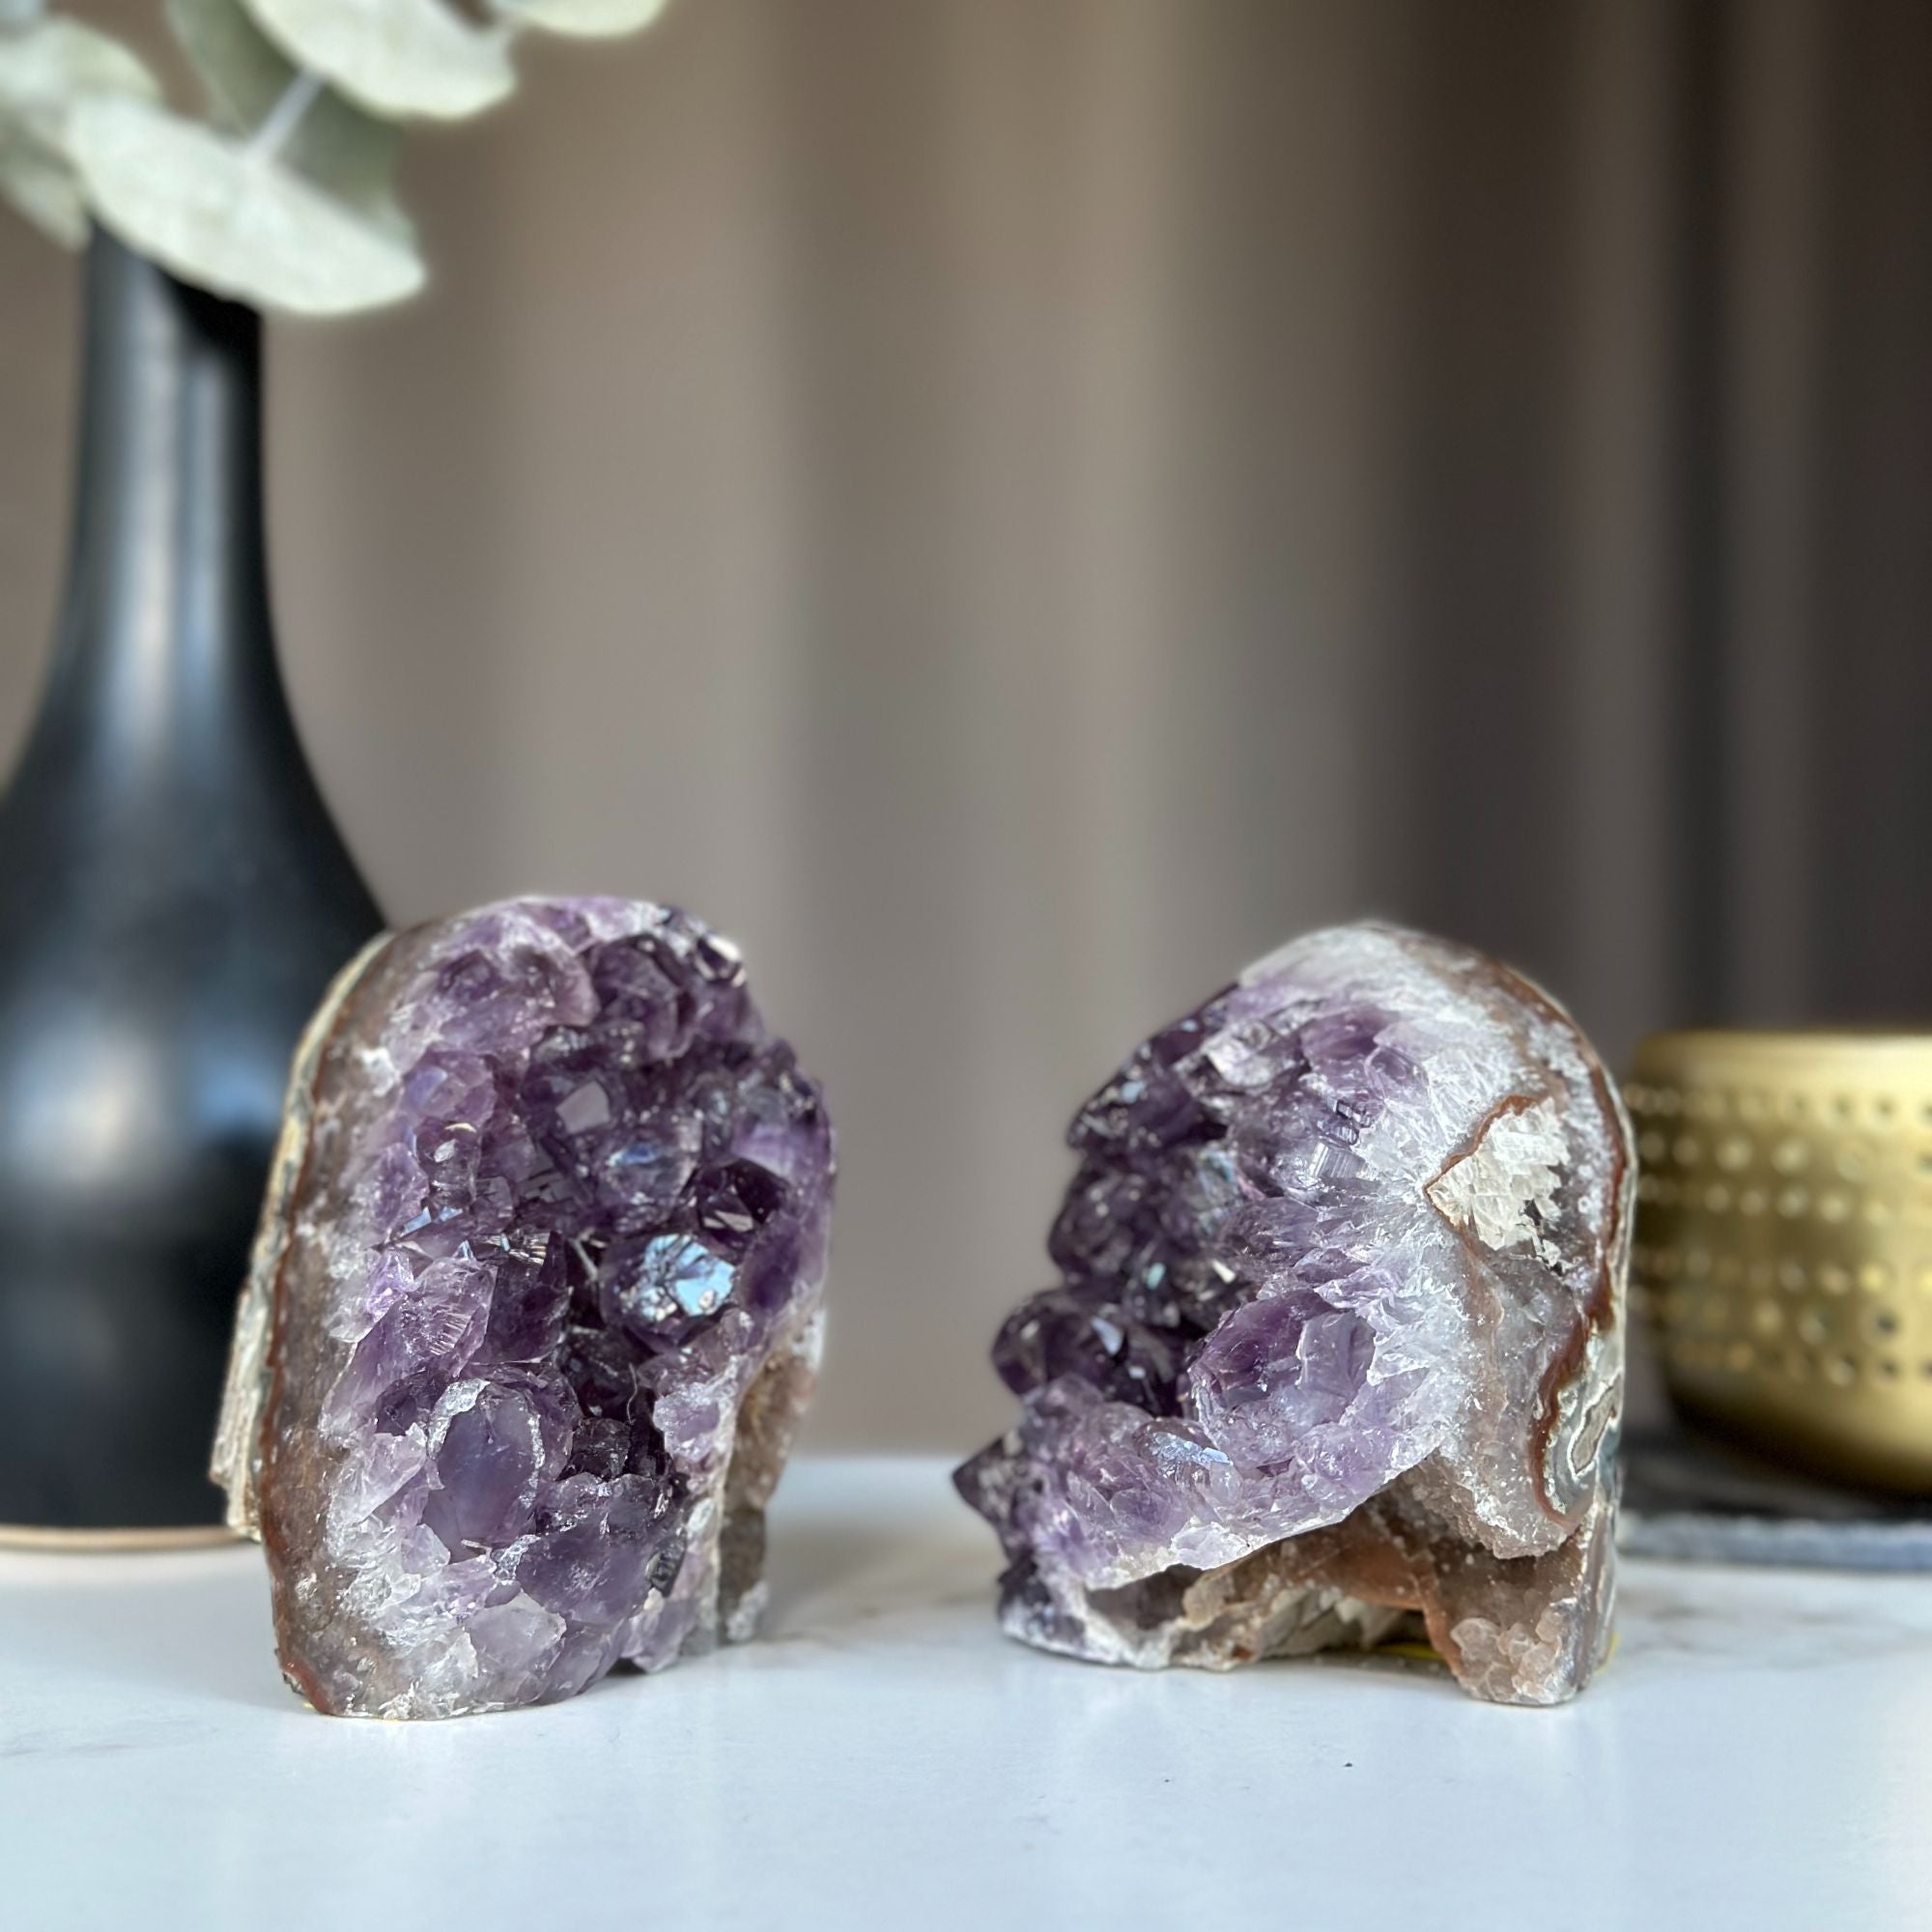 Deep Purple Amethyst Geode set with Agate formations at edges